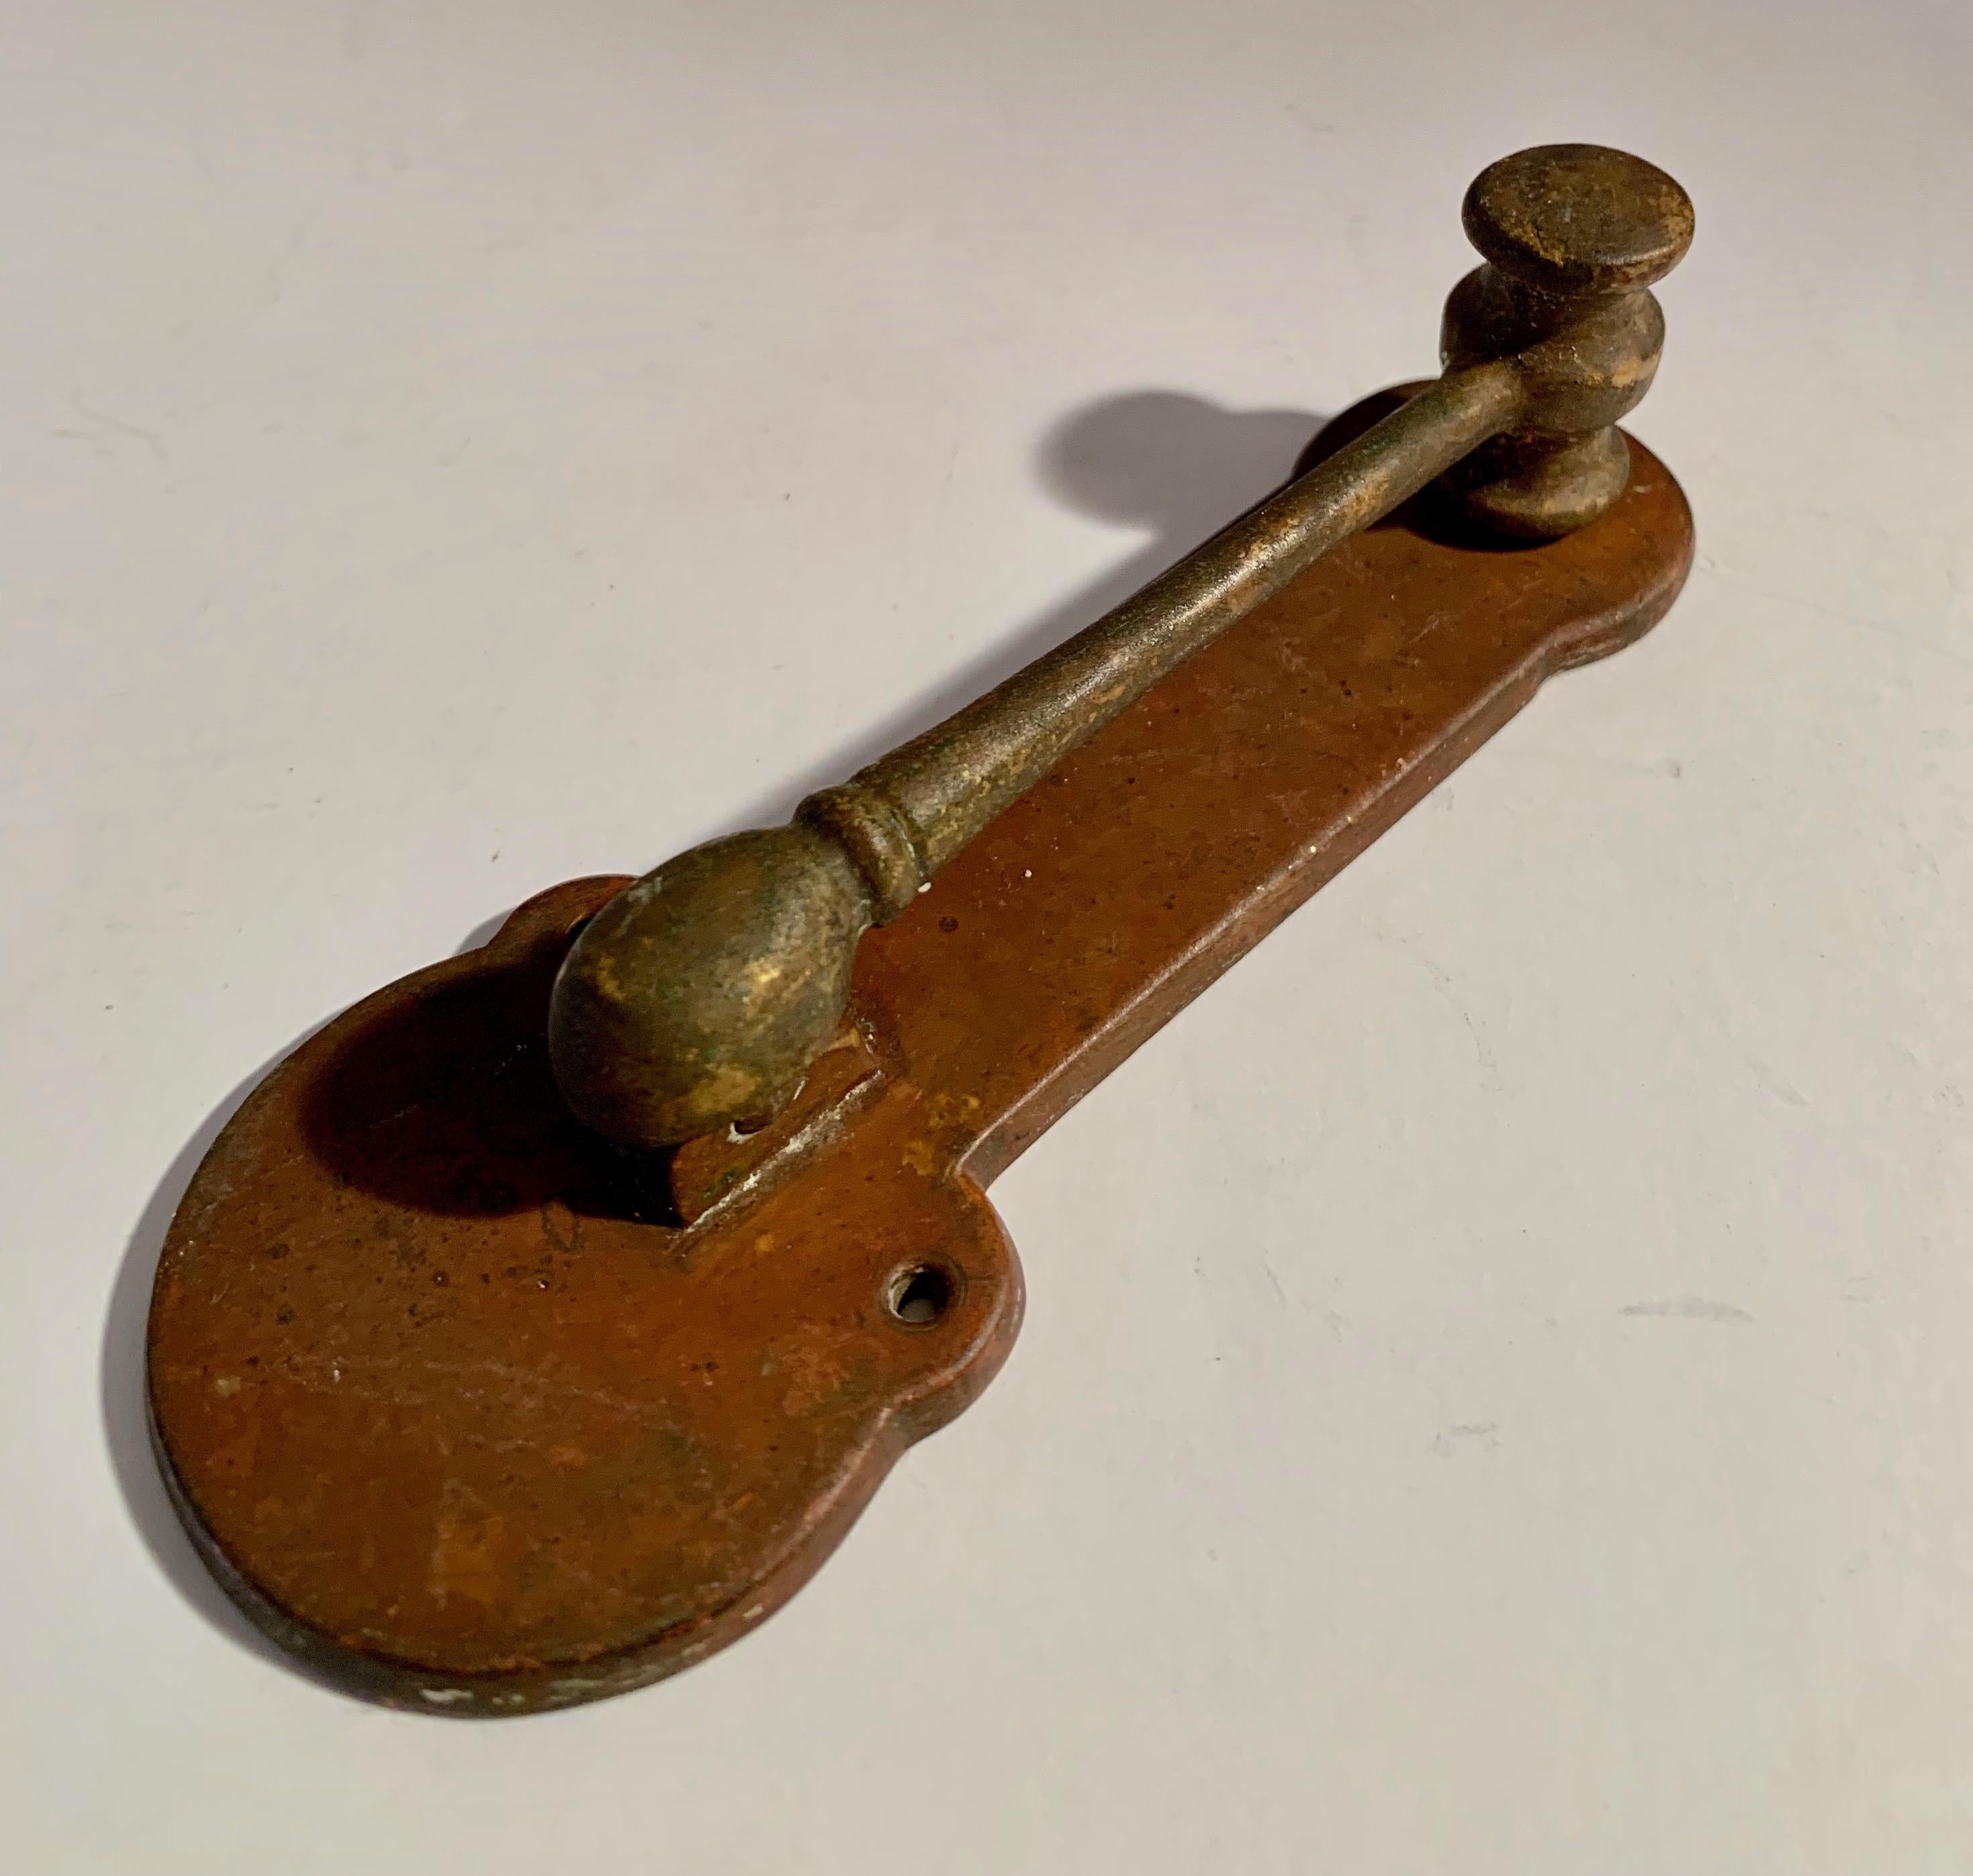 Brass 'Gavel' door knocker - a smallish door knocker in the shape of a Hammer or gavel. Ideal for, well, you be the 